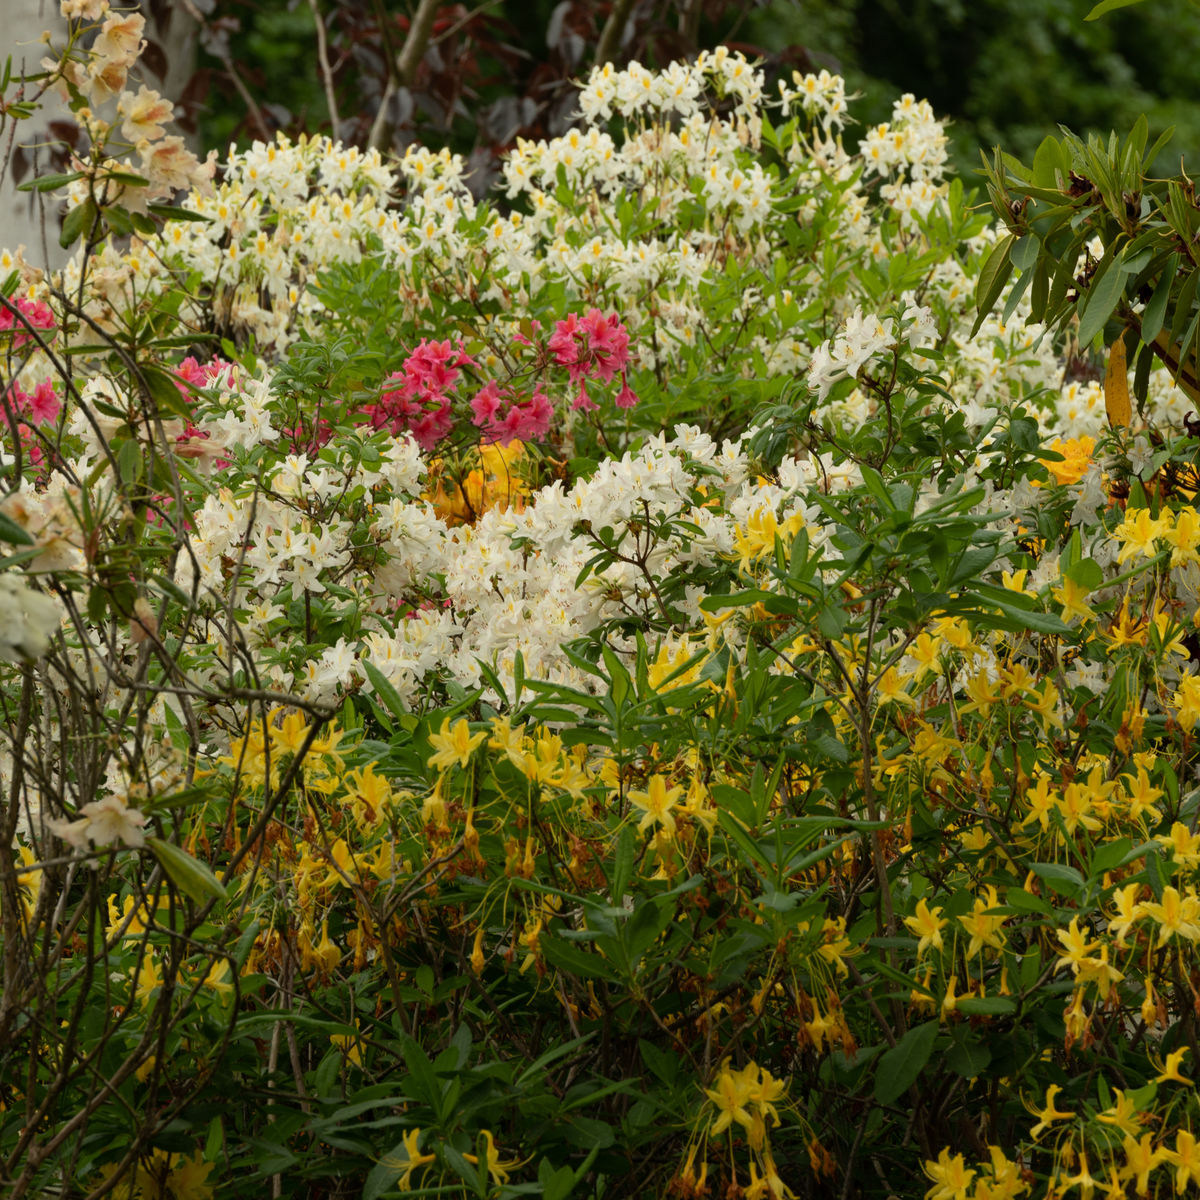 Altries - azaleas and rhododendrons